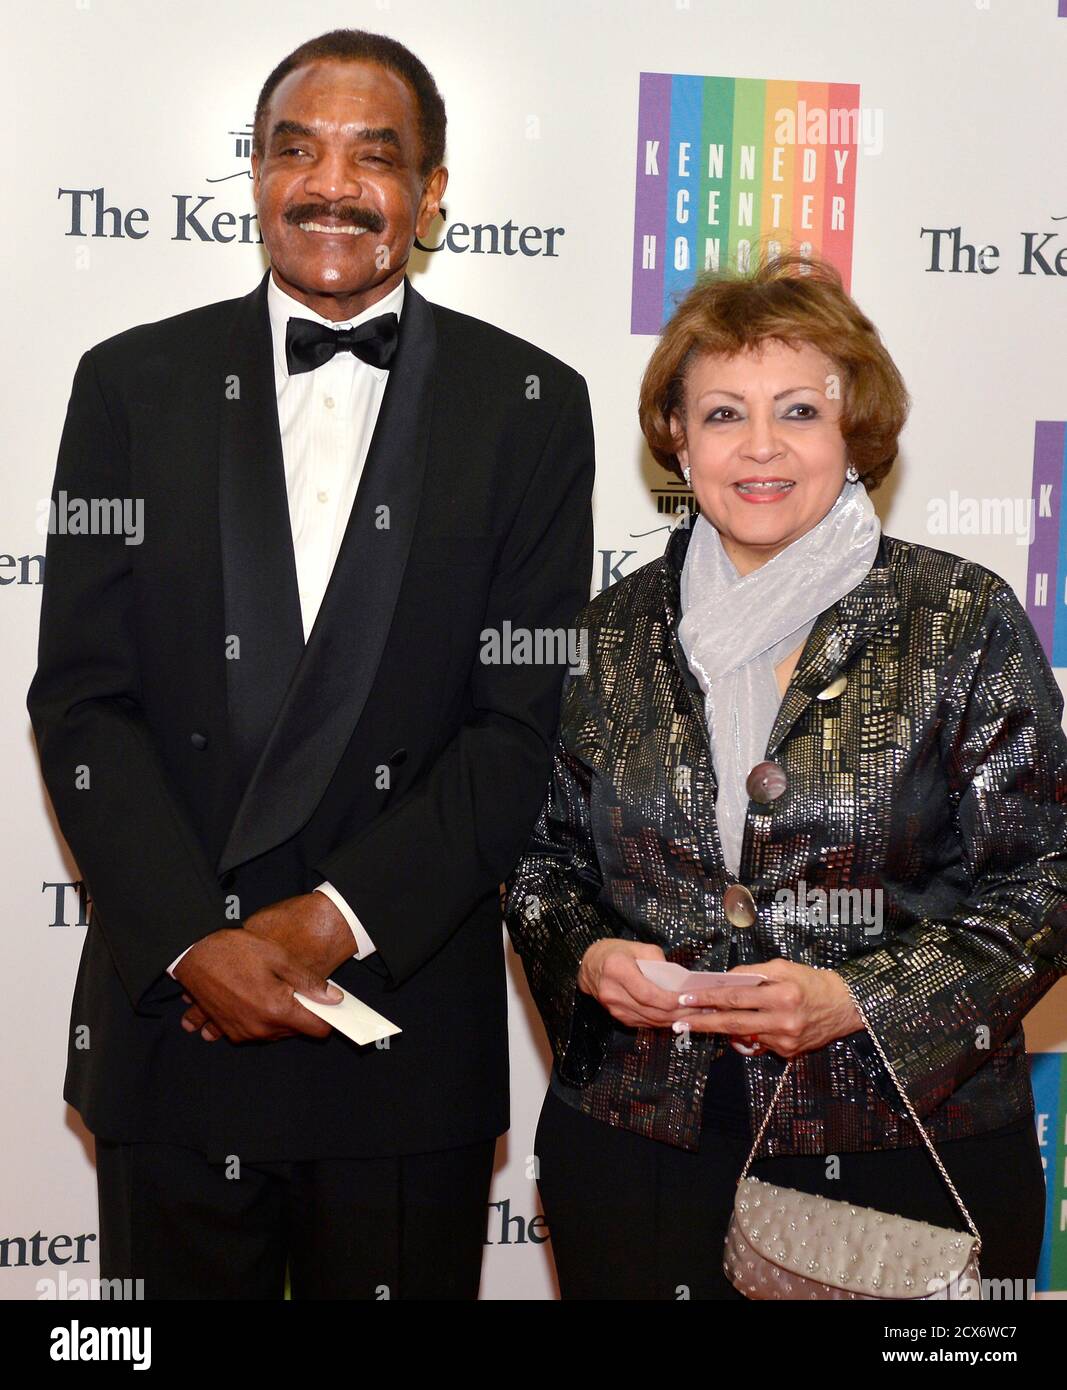 Former NFL running back Calvin Hill and his wife Janet pose for photographers on the red carpet as they arrive ahead of the 37th Annual Kennedy Center gala dinner at the U.S. State Department in Washington December 6, 2014. This year's show will toast actor Tom Hanks, recording artists Sting and Al Green, ballerina Patricia McBride, and actress Lily Tomlin, 'for their lifetime contributions to American culture.'       REUTERS/Mike Theiler (UNITED STATES - Tags: ENTERTAINMENT POLITICS SPORT FOOTBALL) Stock Photo